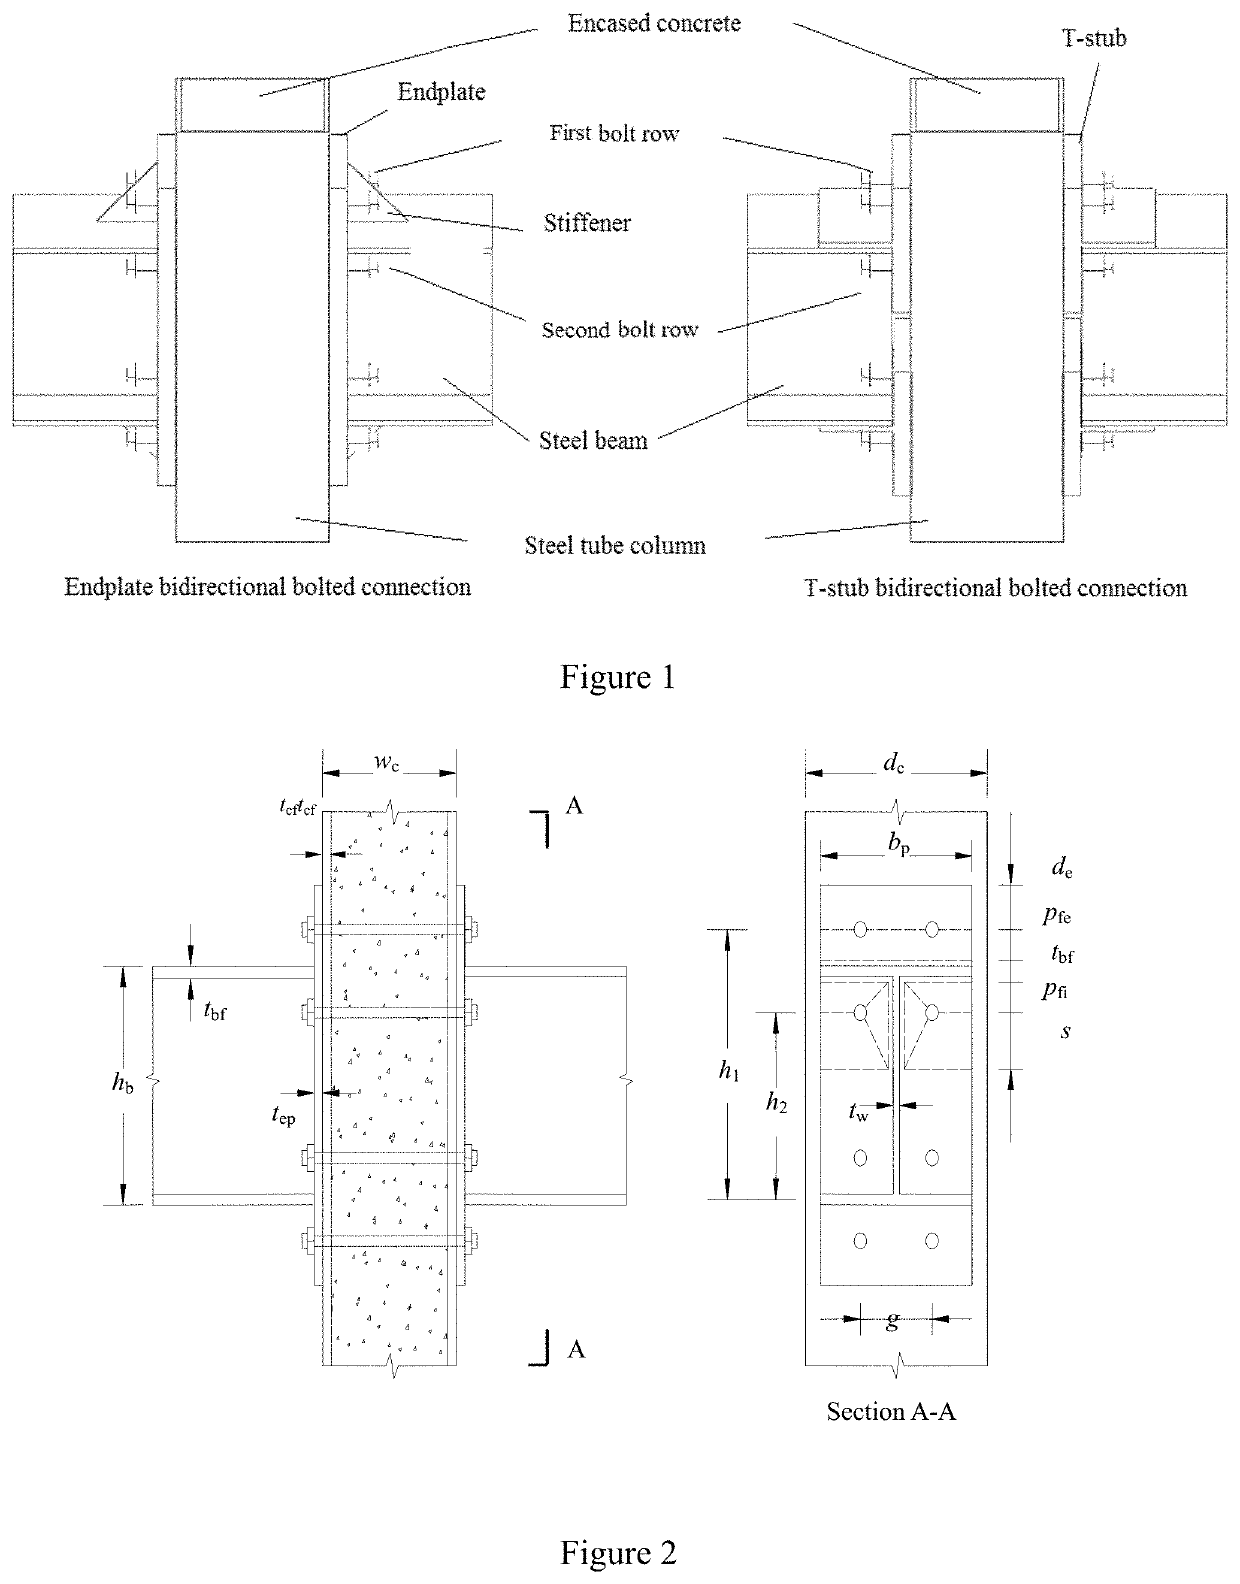 Calculation method of ultimate moment resistance and moment-rotation curve for steel beam to concrete-filled steel tube column connections with bidirectional bolts